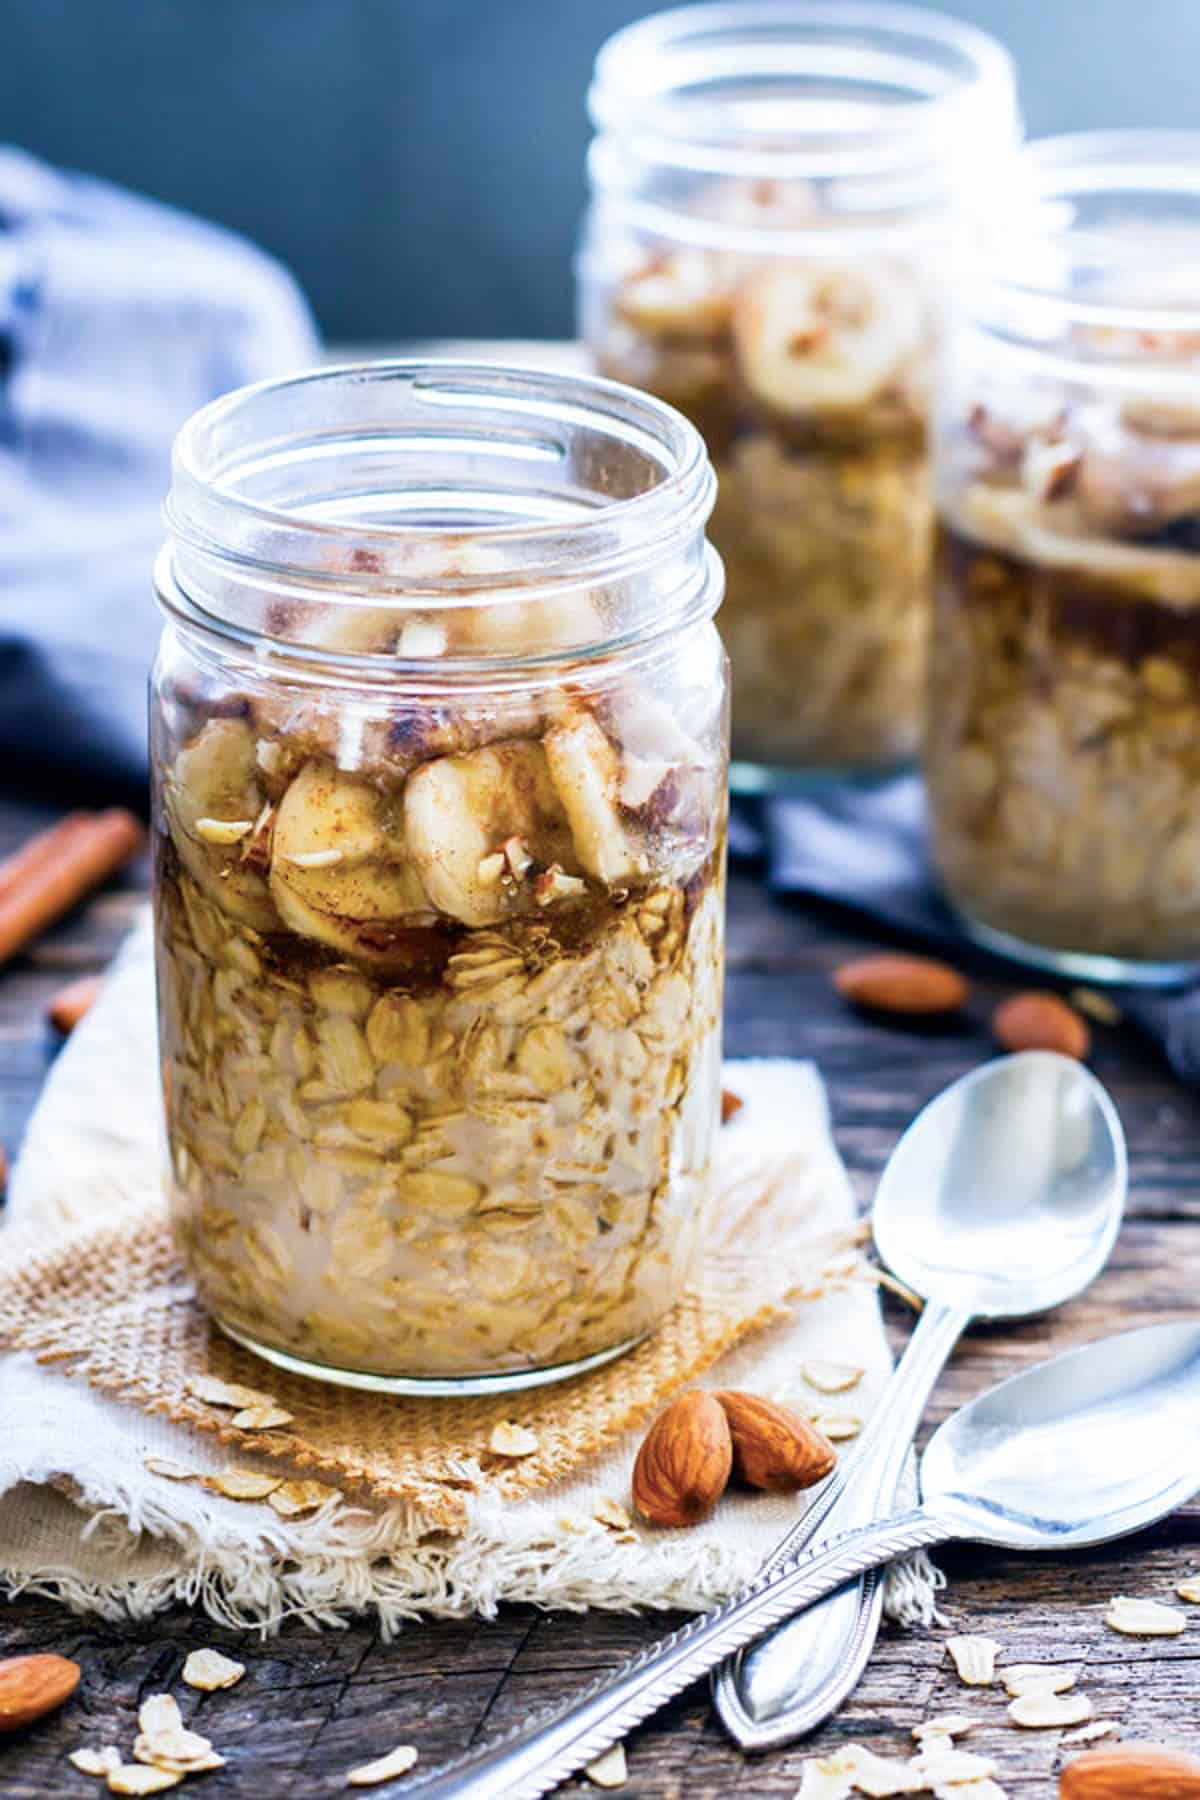 A gluten-free overnight oats recipe made with almond butter in a jar for a healthy breakfast.